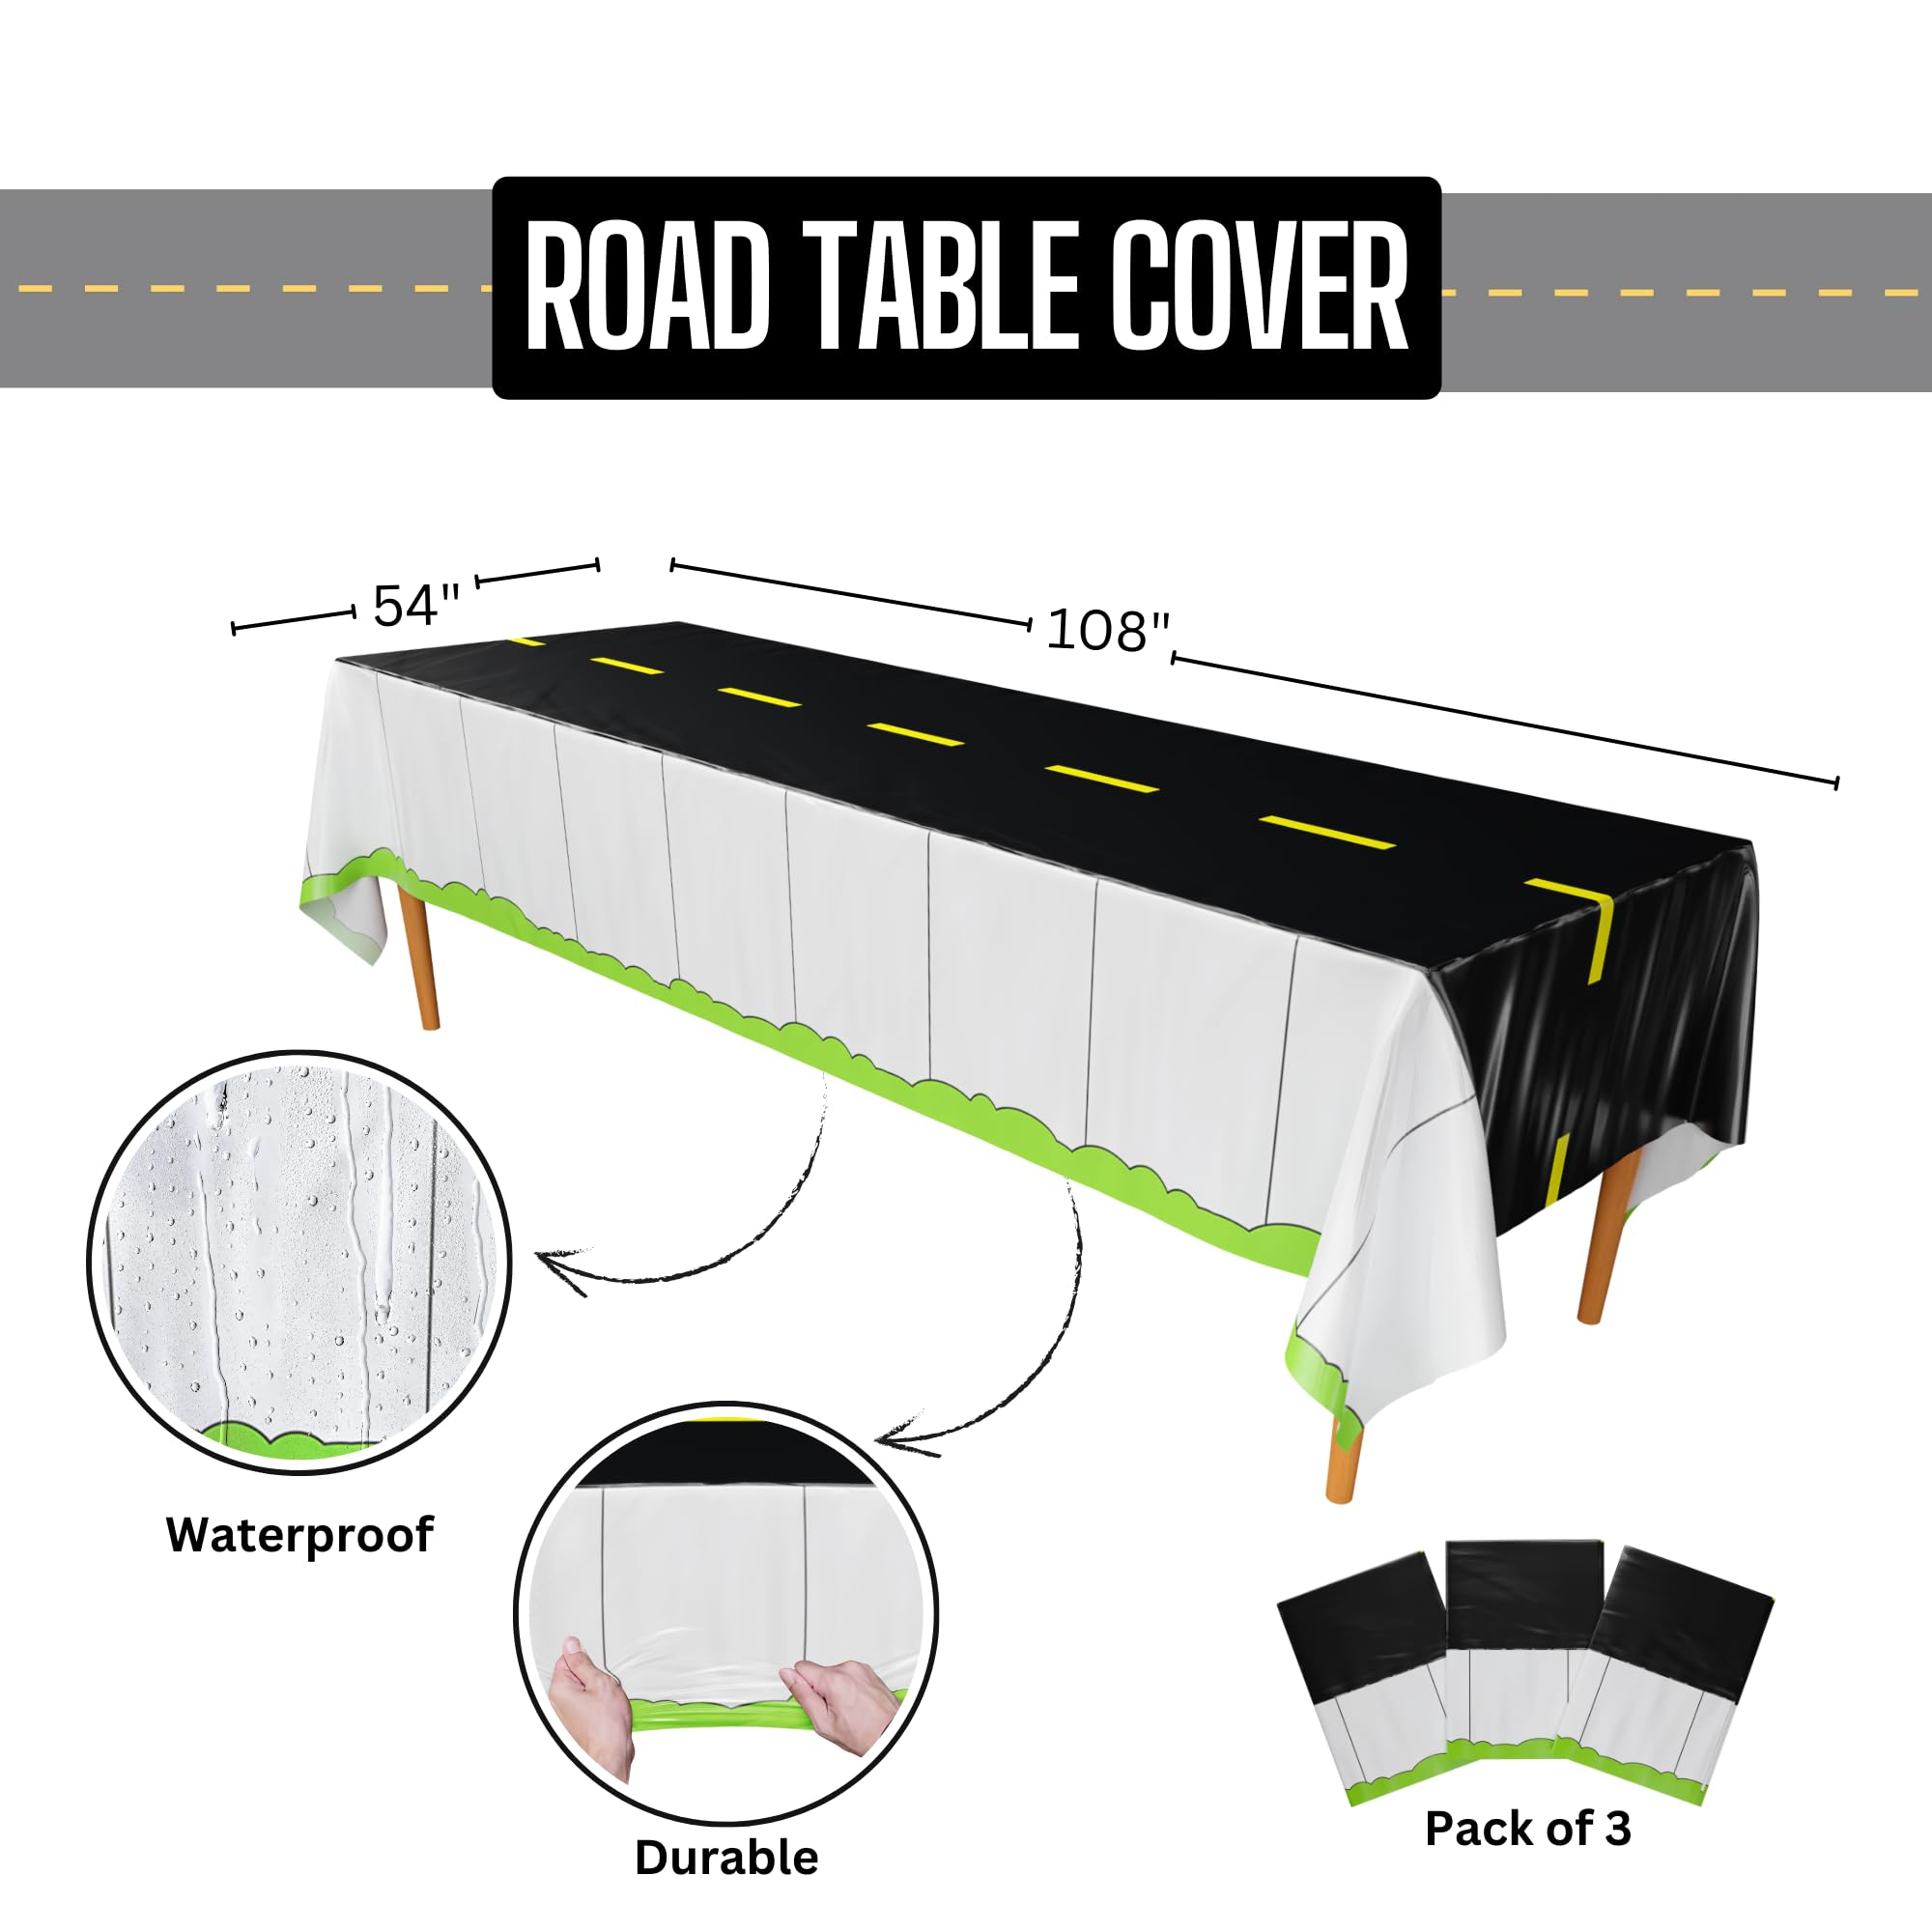 Road Tablecovers - 54in x 108in (3 Pack)